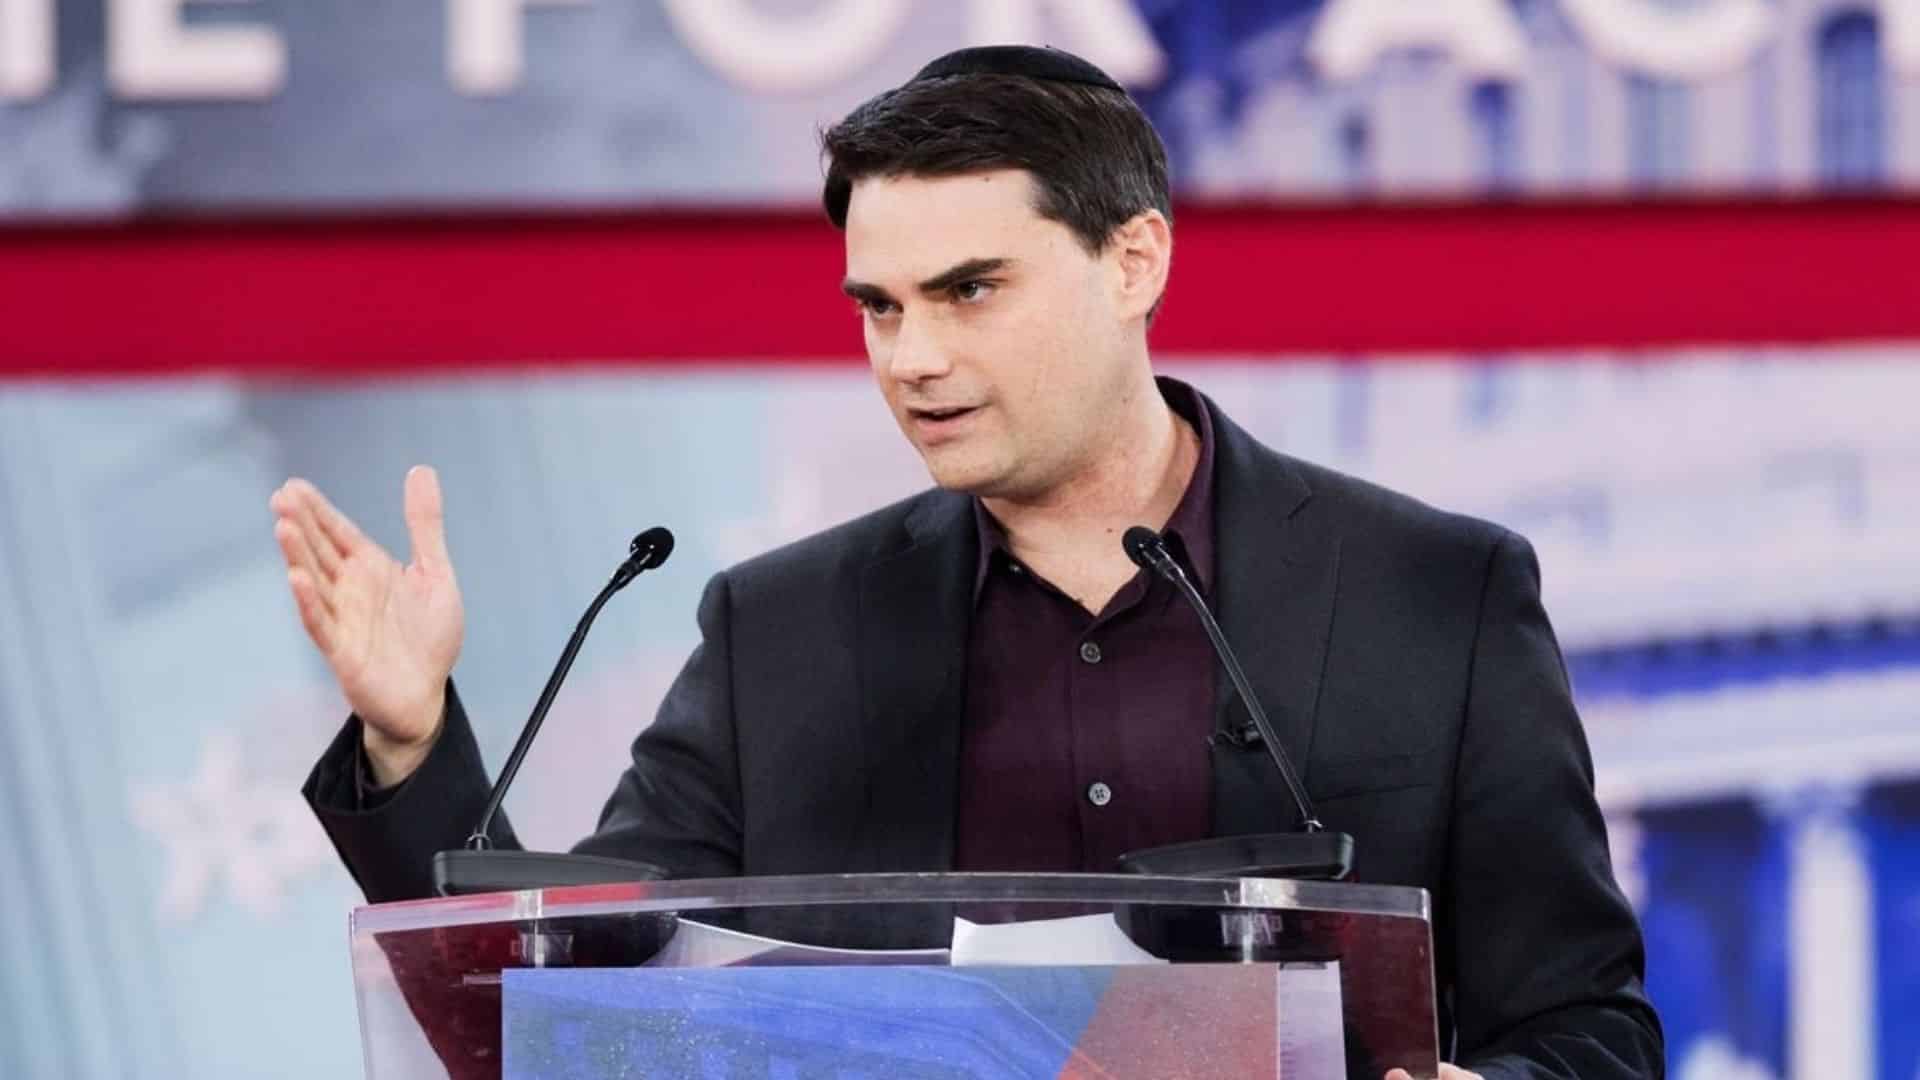 Ben Shapiro Net Worth 2022: How Much This Media Personality Earns?